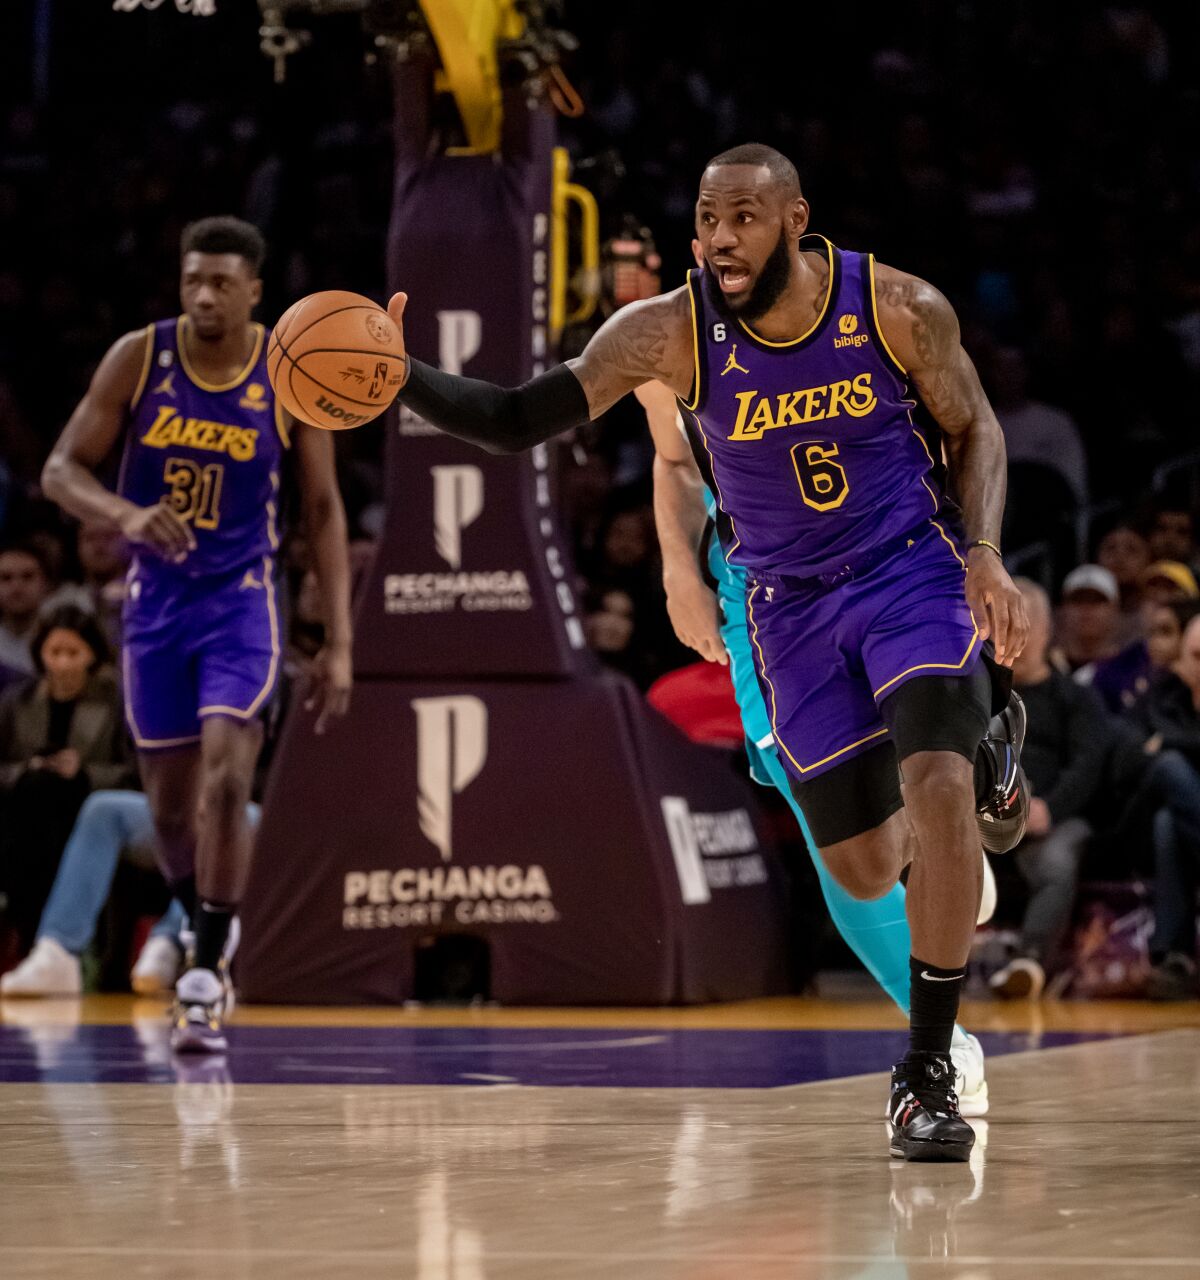 Lakers forward LeBron James directs his teammates against the Hornets in the first half.